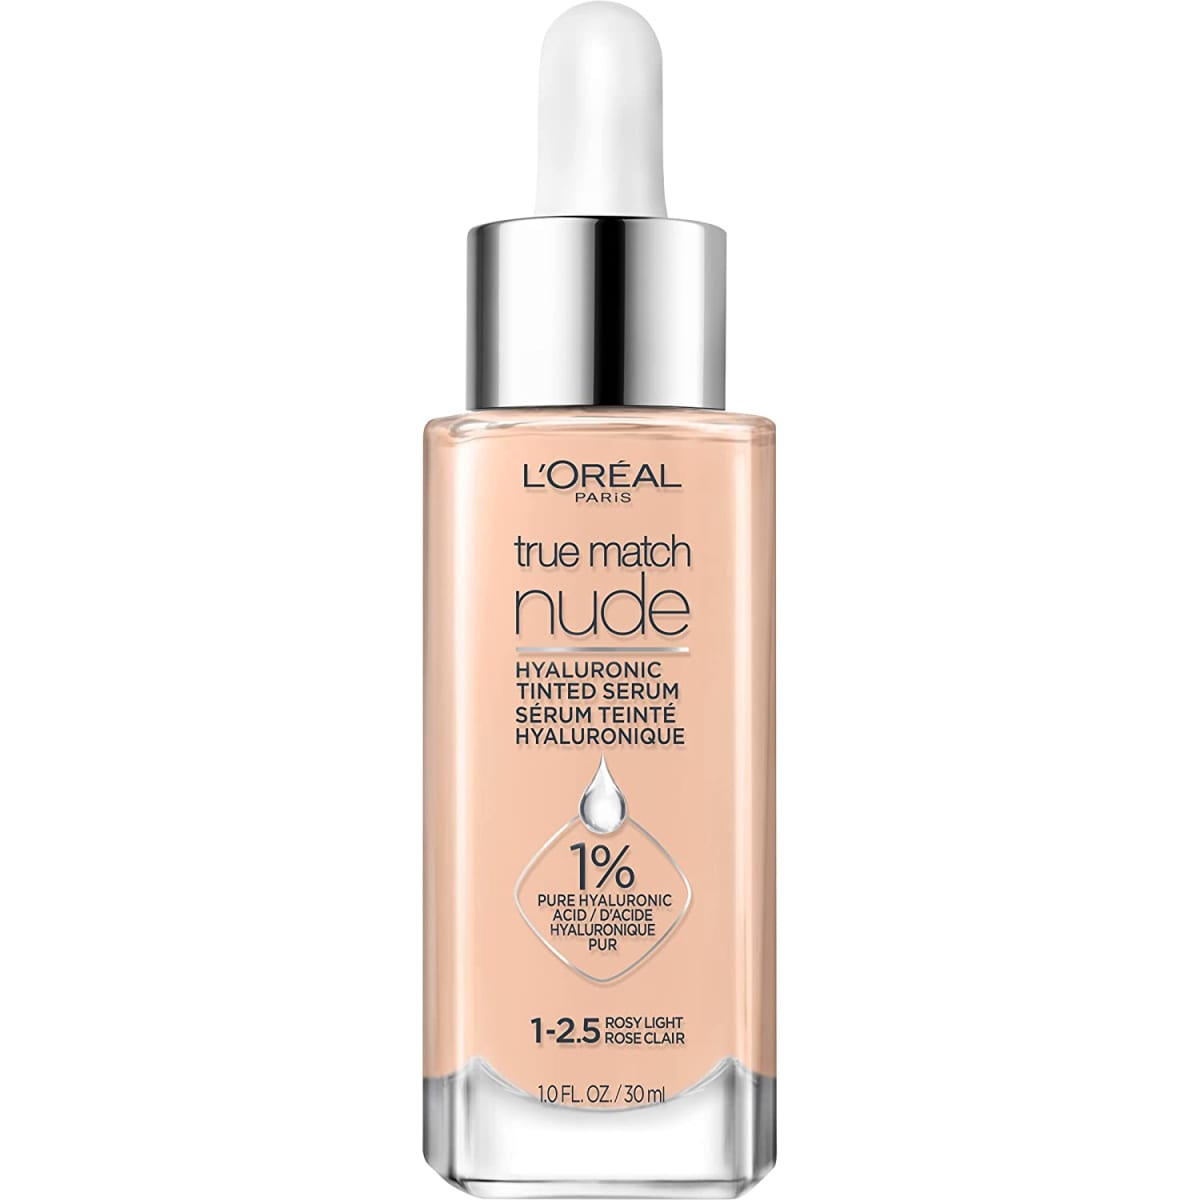 True Match Nude Hyaluronic Tinted Serum Foundation with 1% Hyaluronic acid